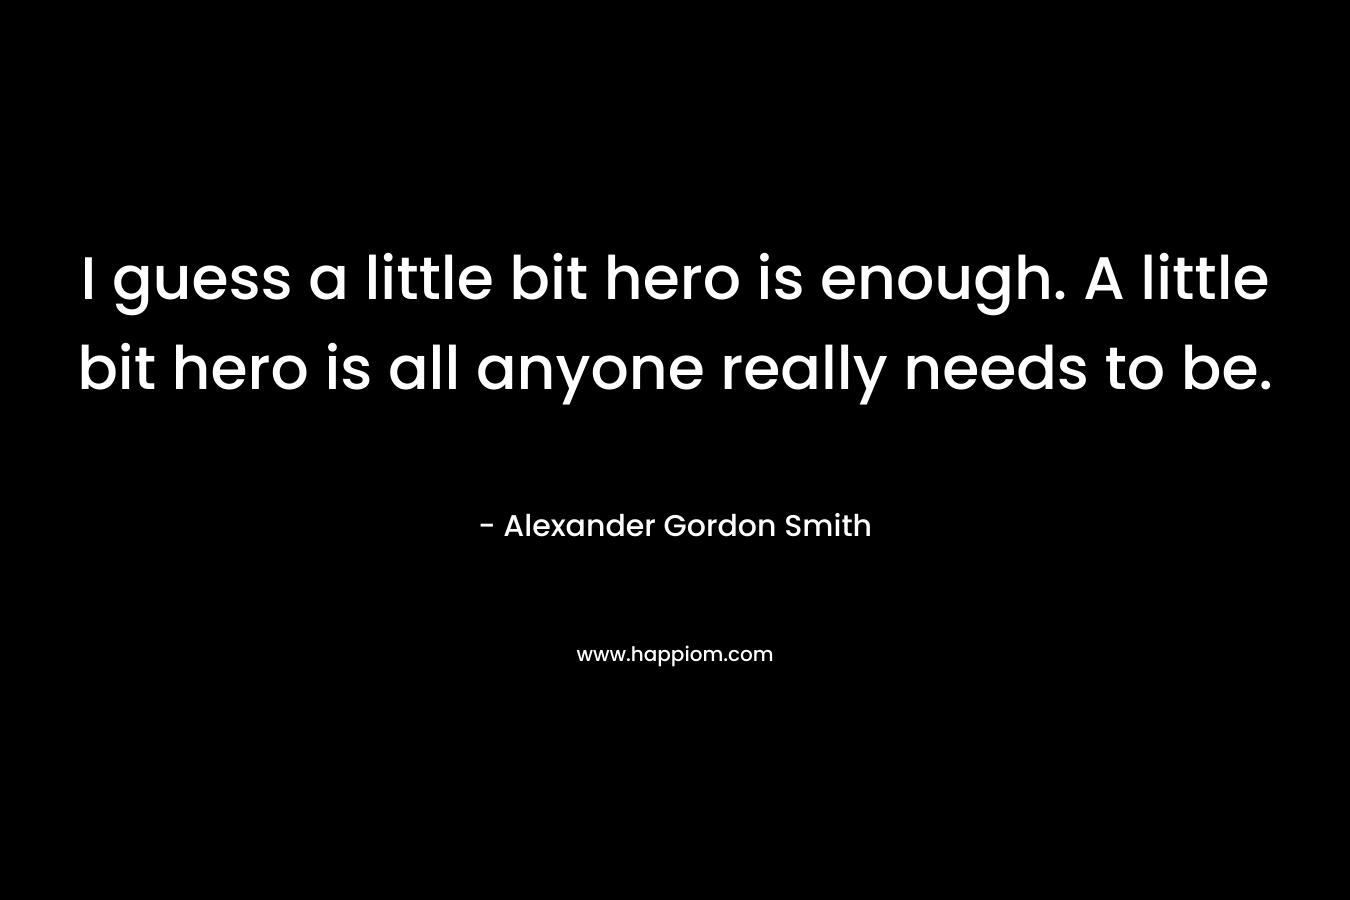 I guess a little bit hero is enough. A little bit hero is all anyone really needs to be.